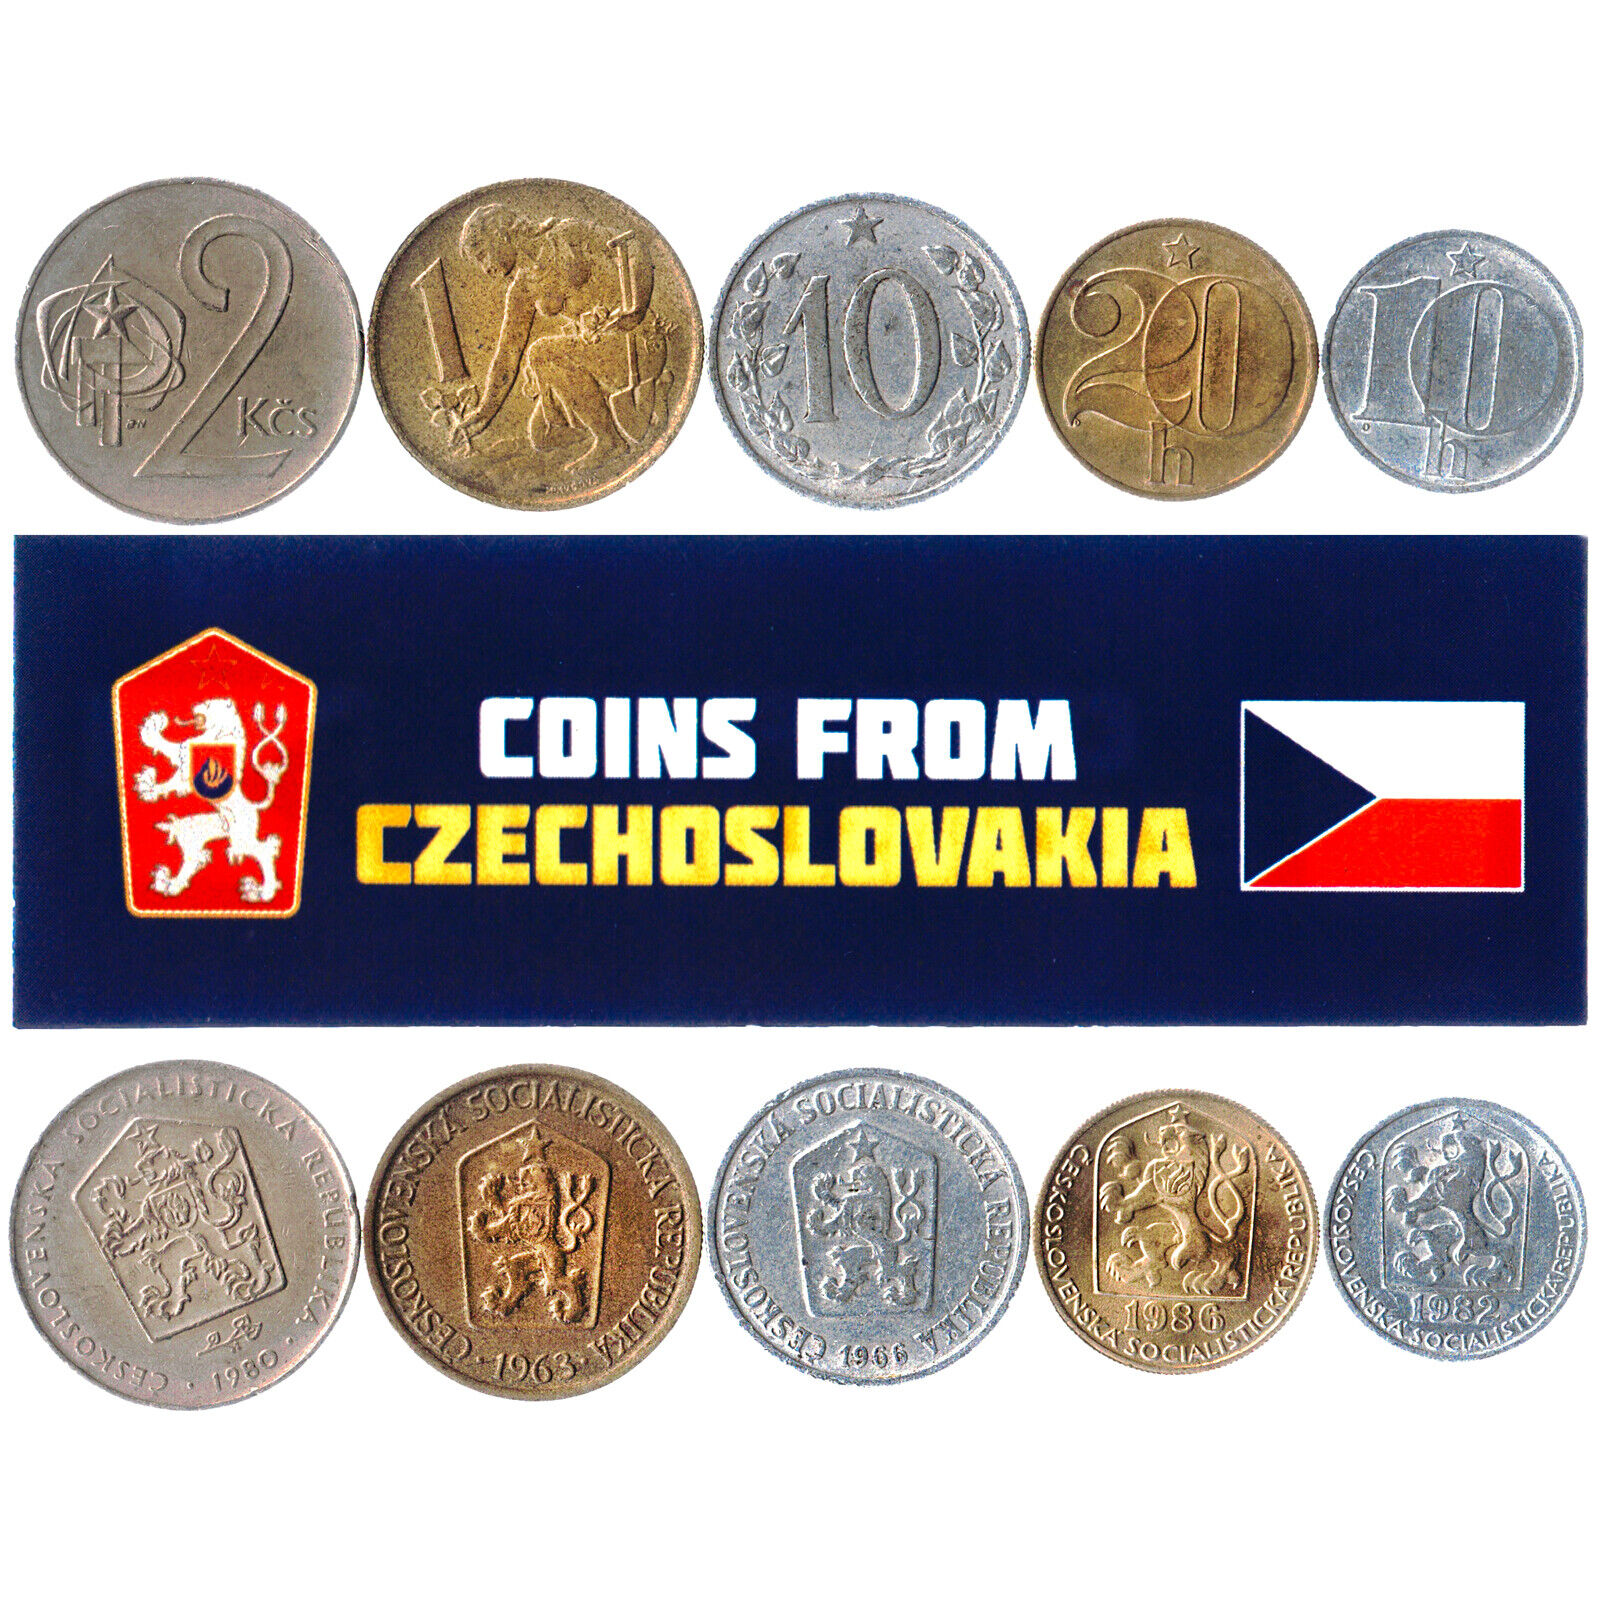 5 CZECHOSLOVAKIA COINS DIFFERENT EUROPEAN COINS FOREIGN CURRENCY, VALUABLE MONEY Без бренда